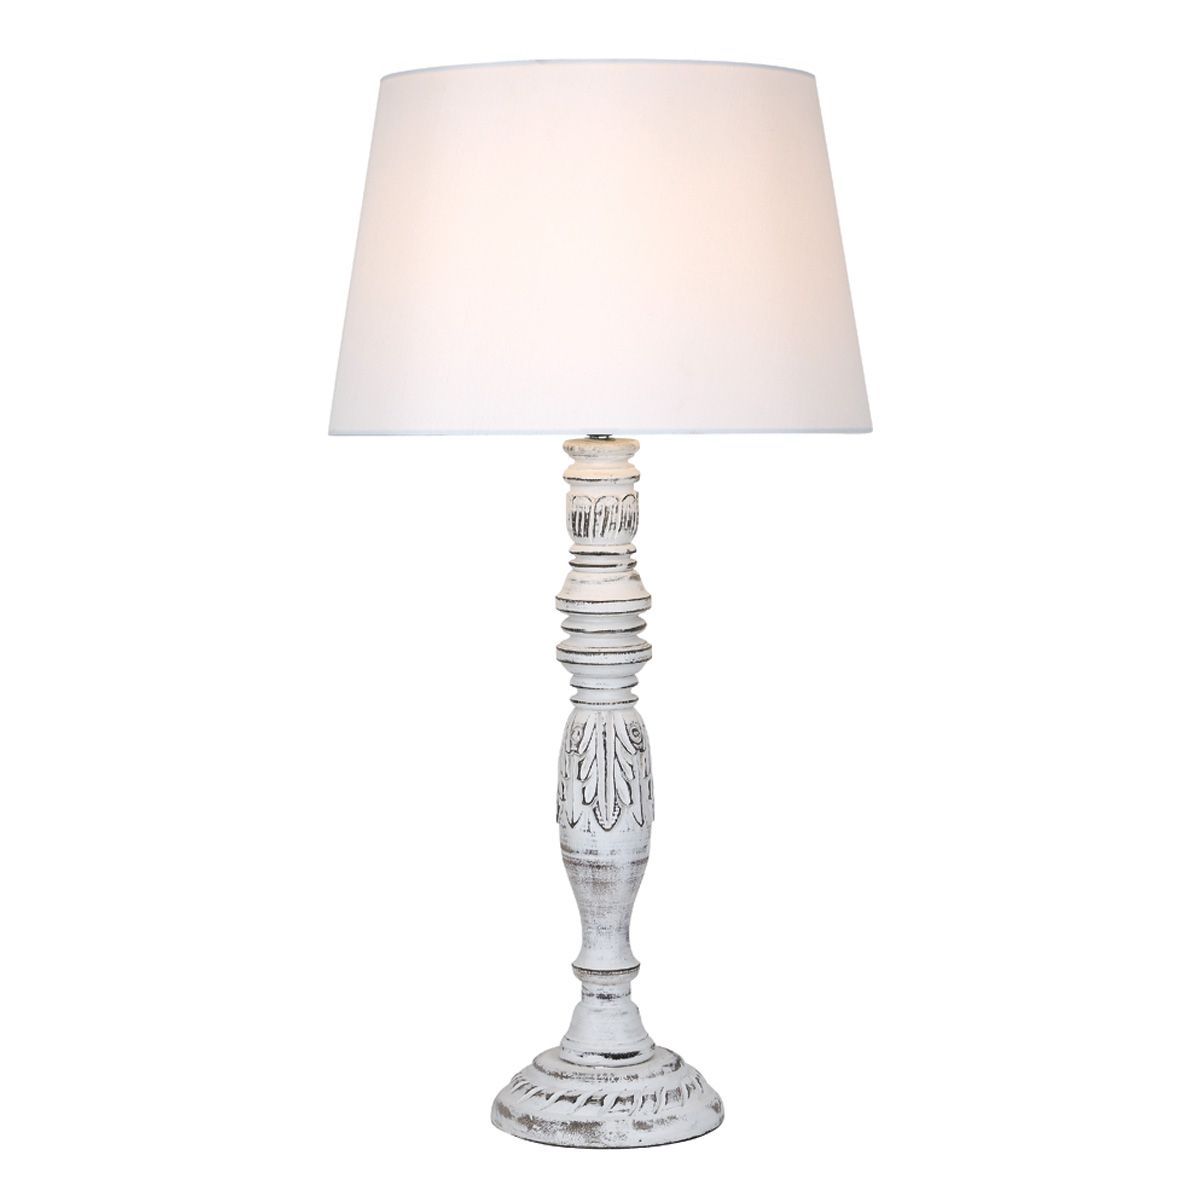 White Washed Table Lamp Love Frankie, White Washed Wood Table Lamps